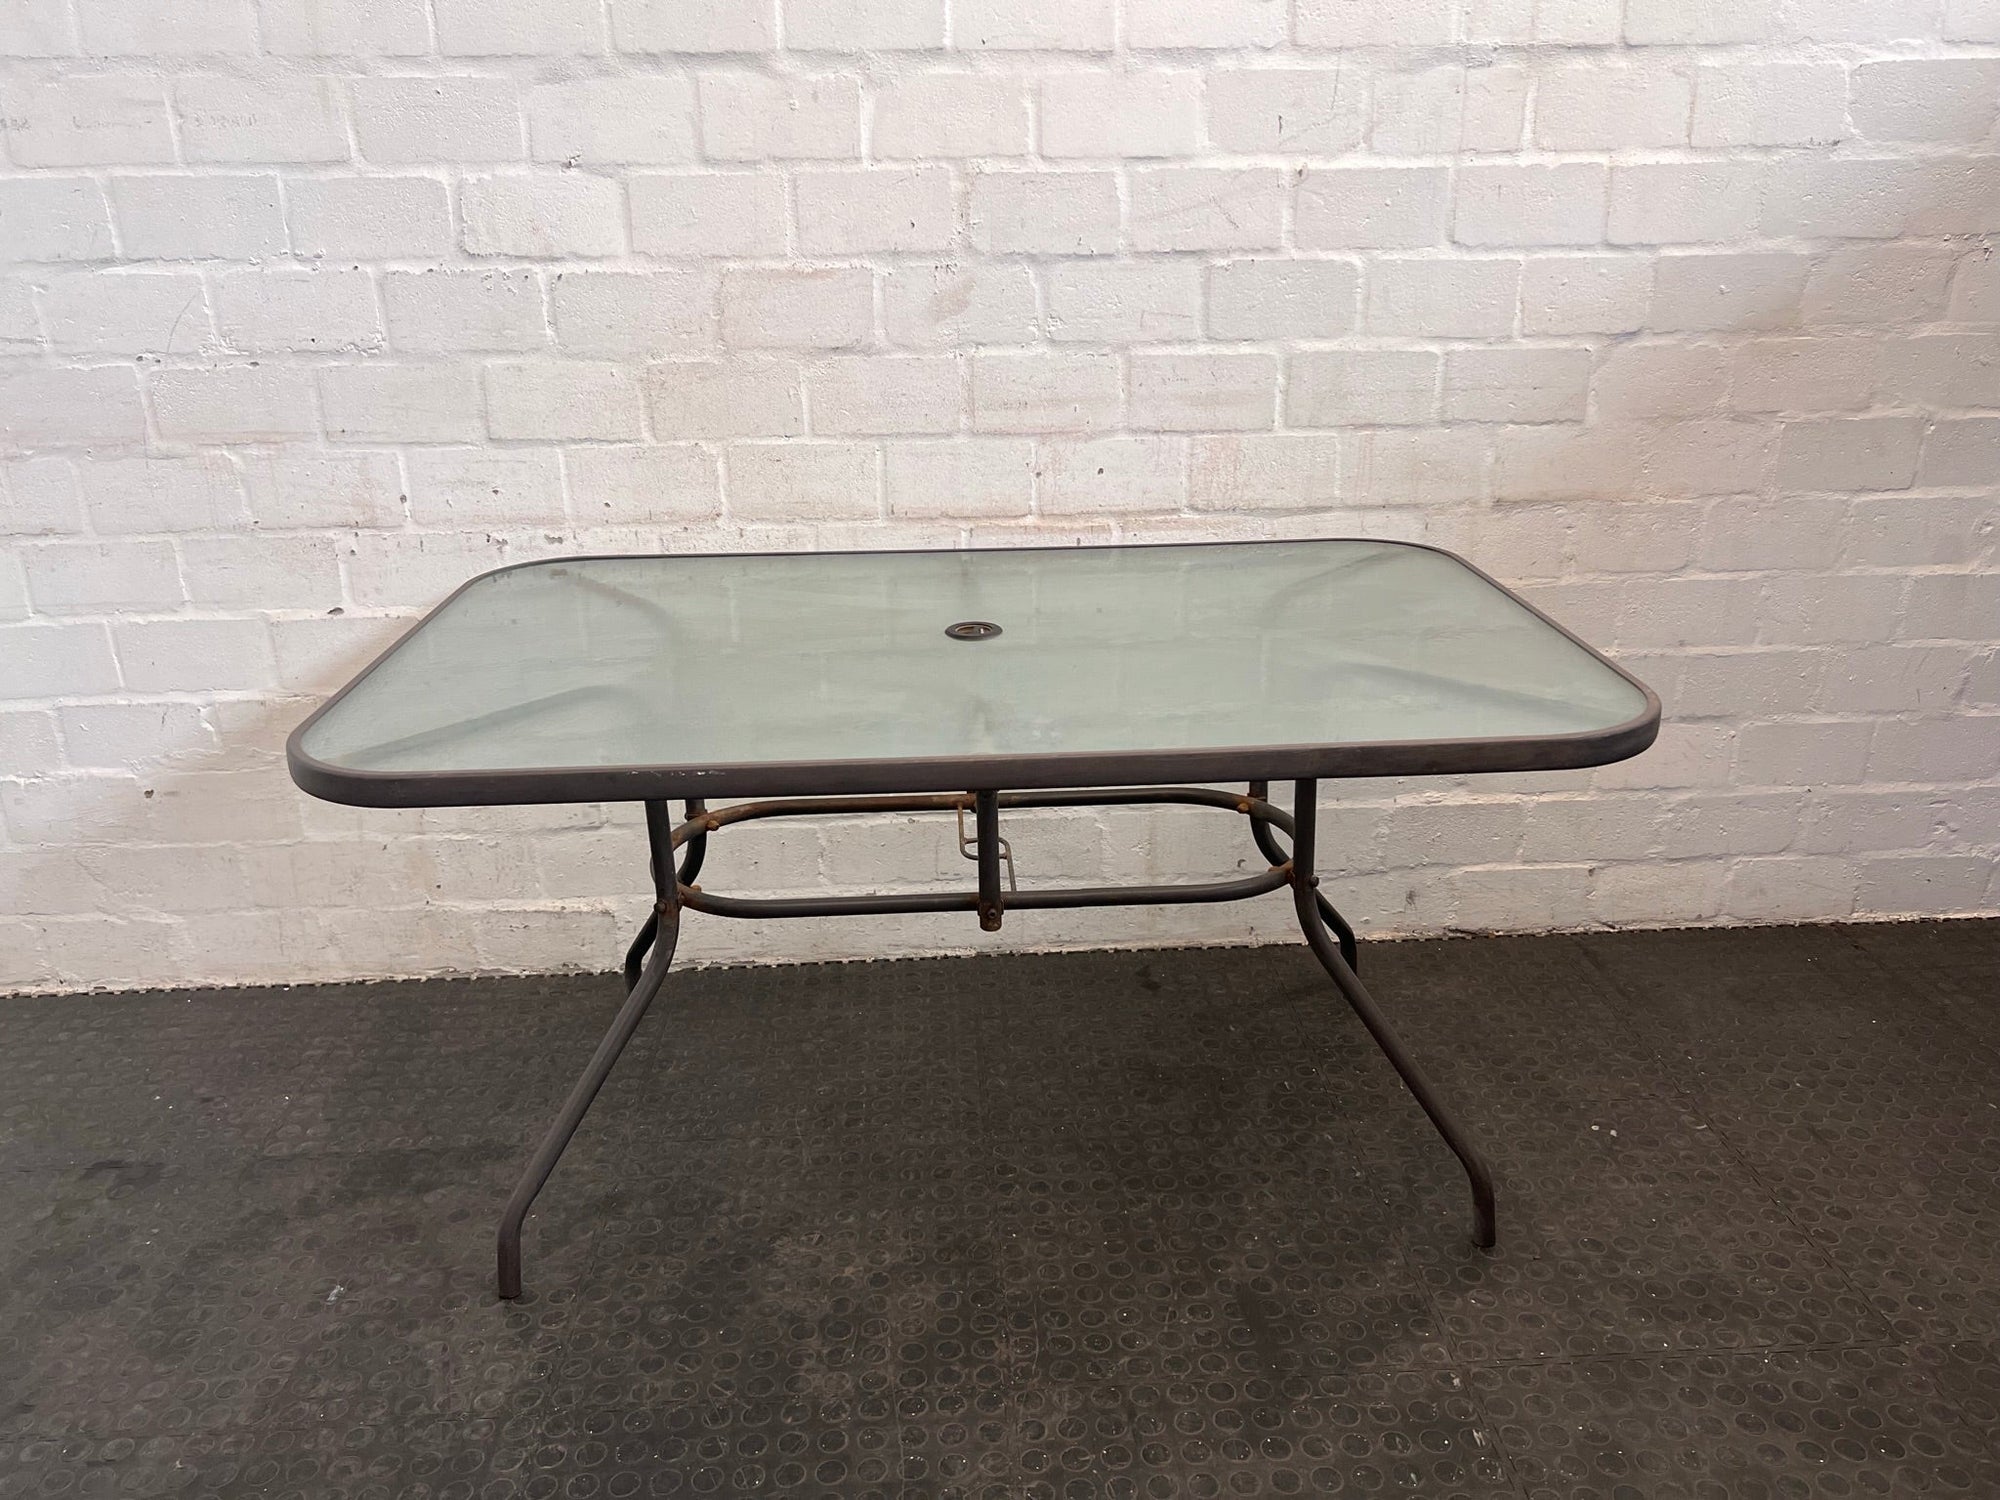 Metal Framed Glass Top Patio Table (Slightly Rusted)